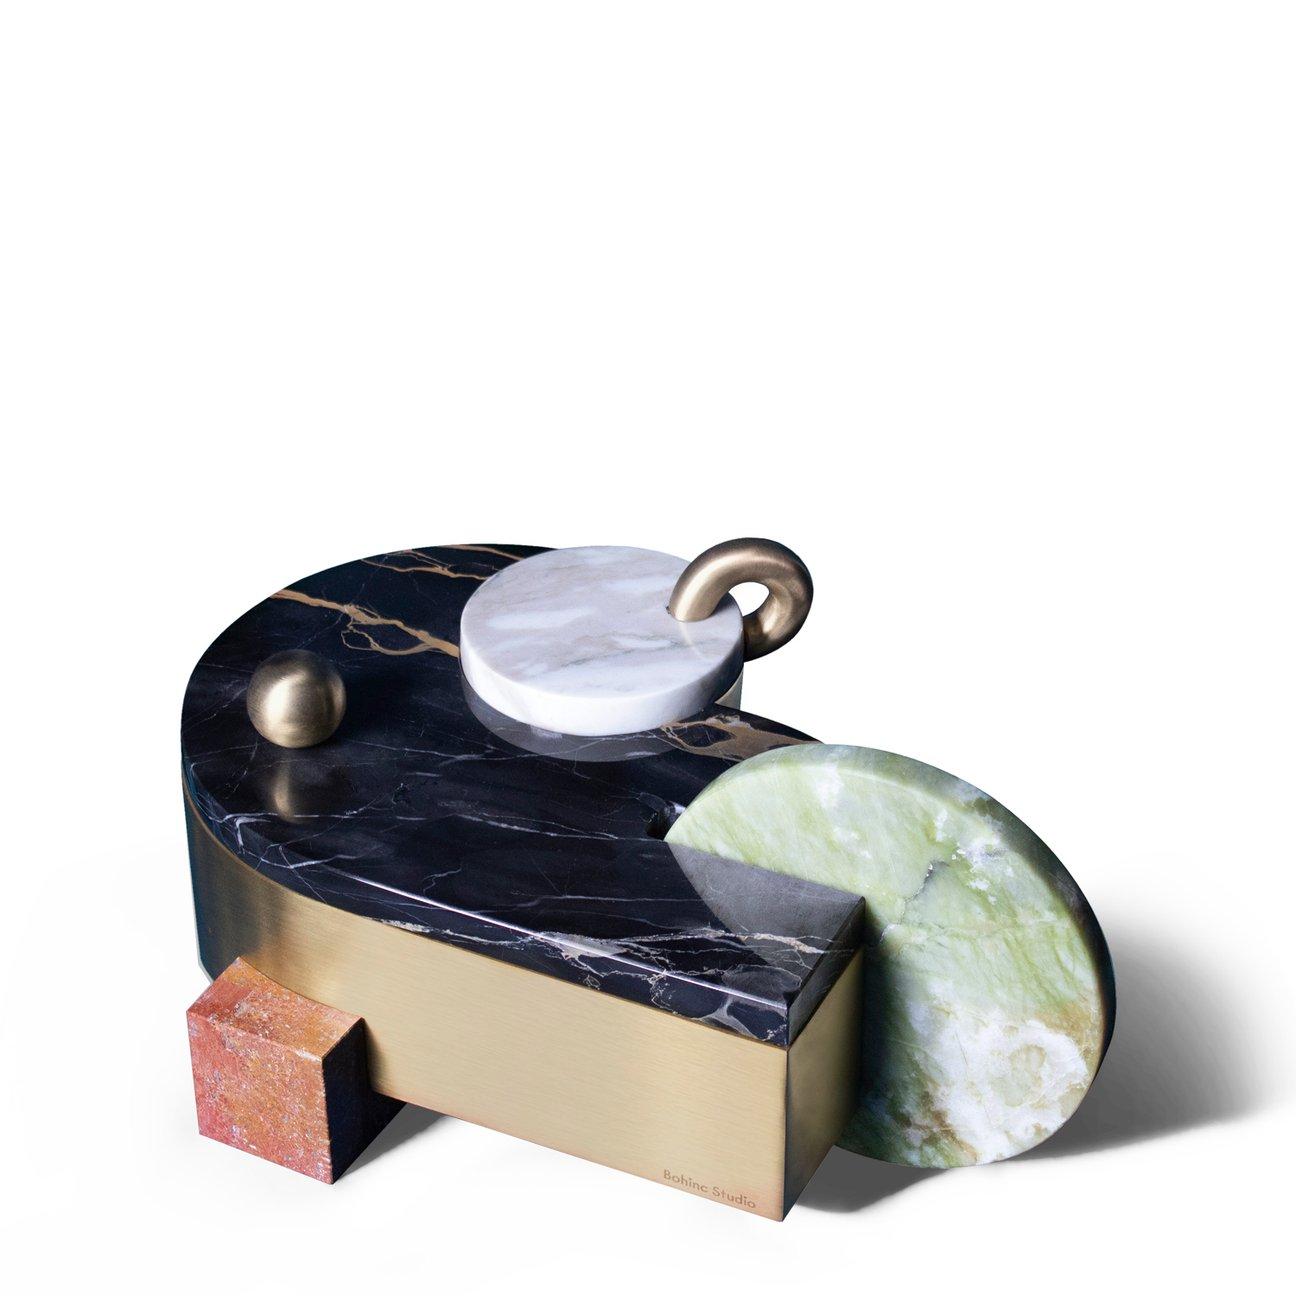 Bohinc Studio’s new Juno box comprises a large brass body and a smaller round compartment. Details in green ming, red travertine, calcatta and portoro marbles add a playful, almost feminine, touch to the otherwise predominantly geometric